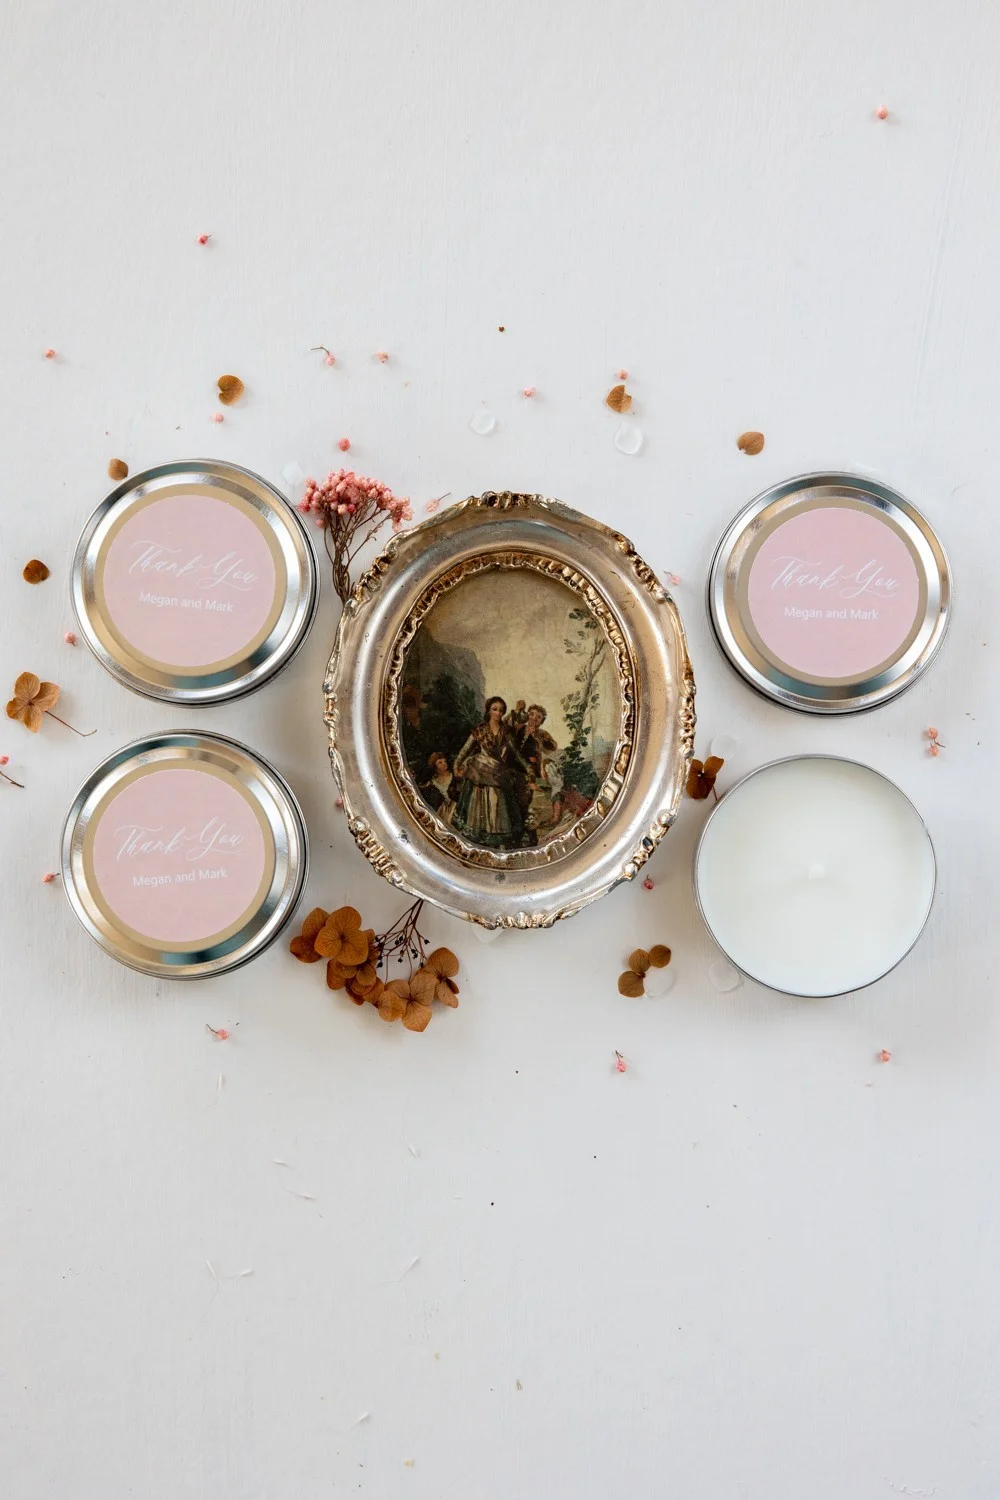 Blush Pink Handmade Soy Wax Candle Favors - Personalized Gifts for Wedding Guests - T22